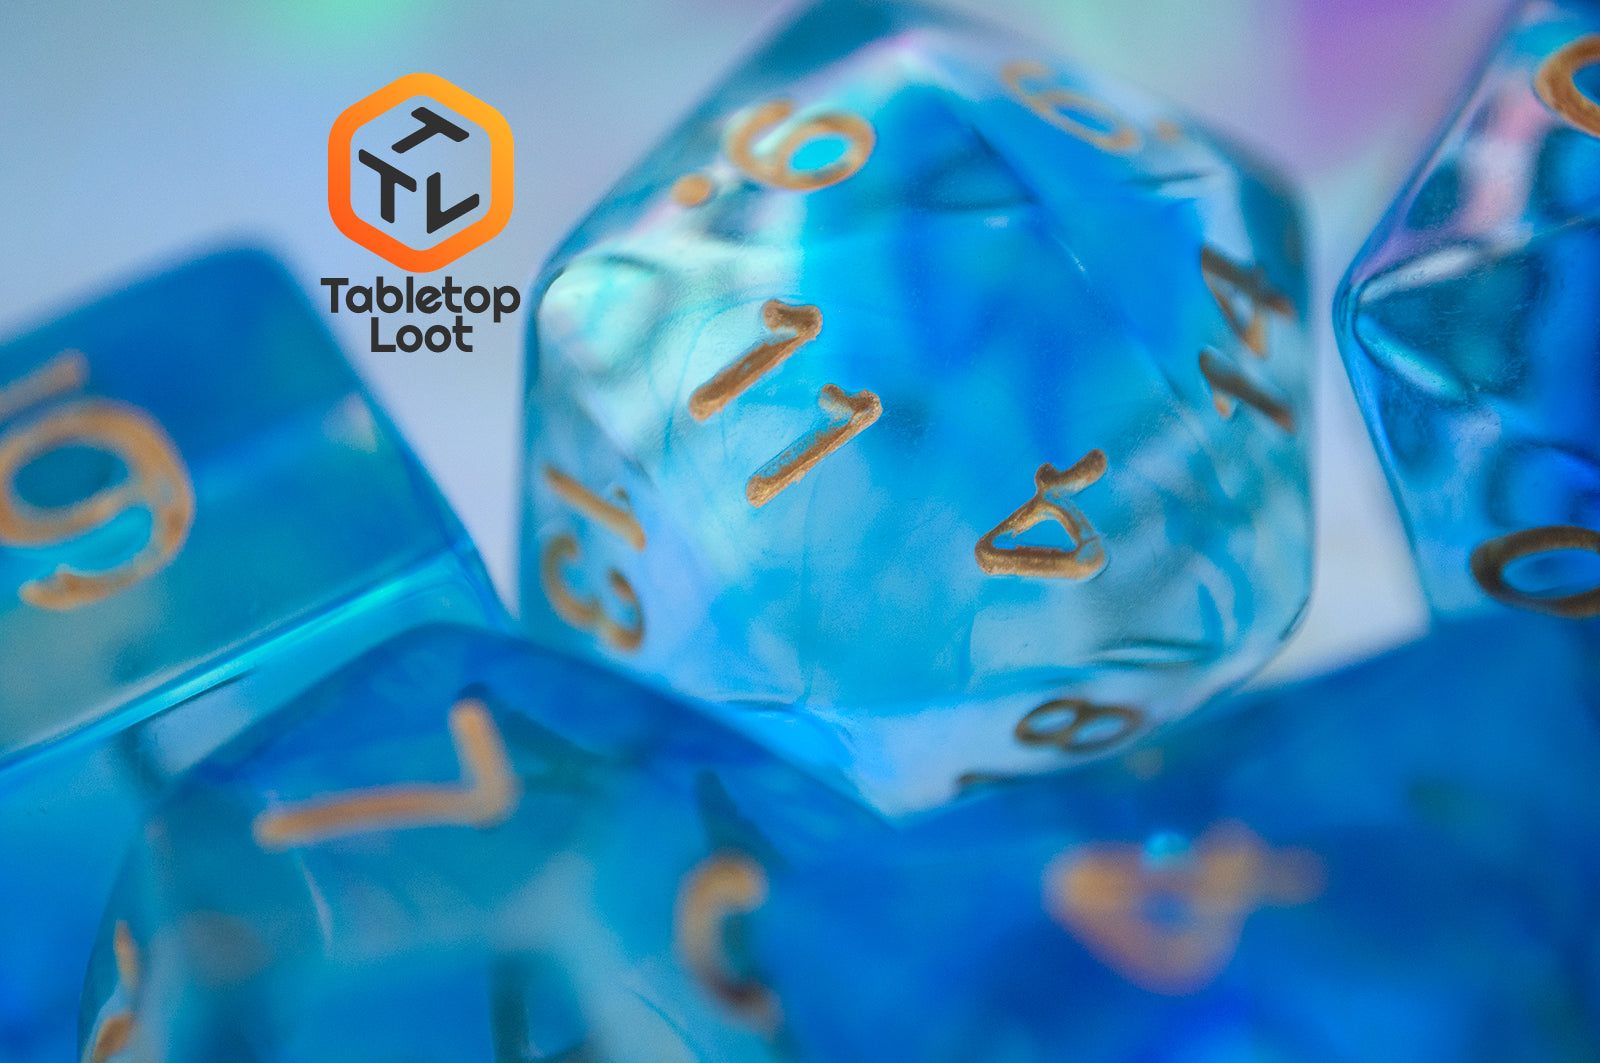 A close up of the D20 from the Under the Sea 7 piece dice set from Tabletop Loot with swirls of blue and gold numbering.